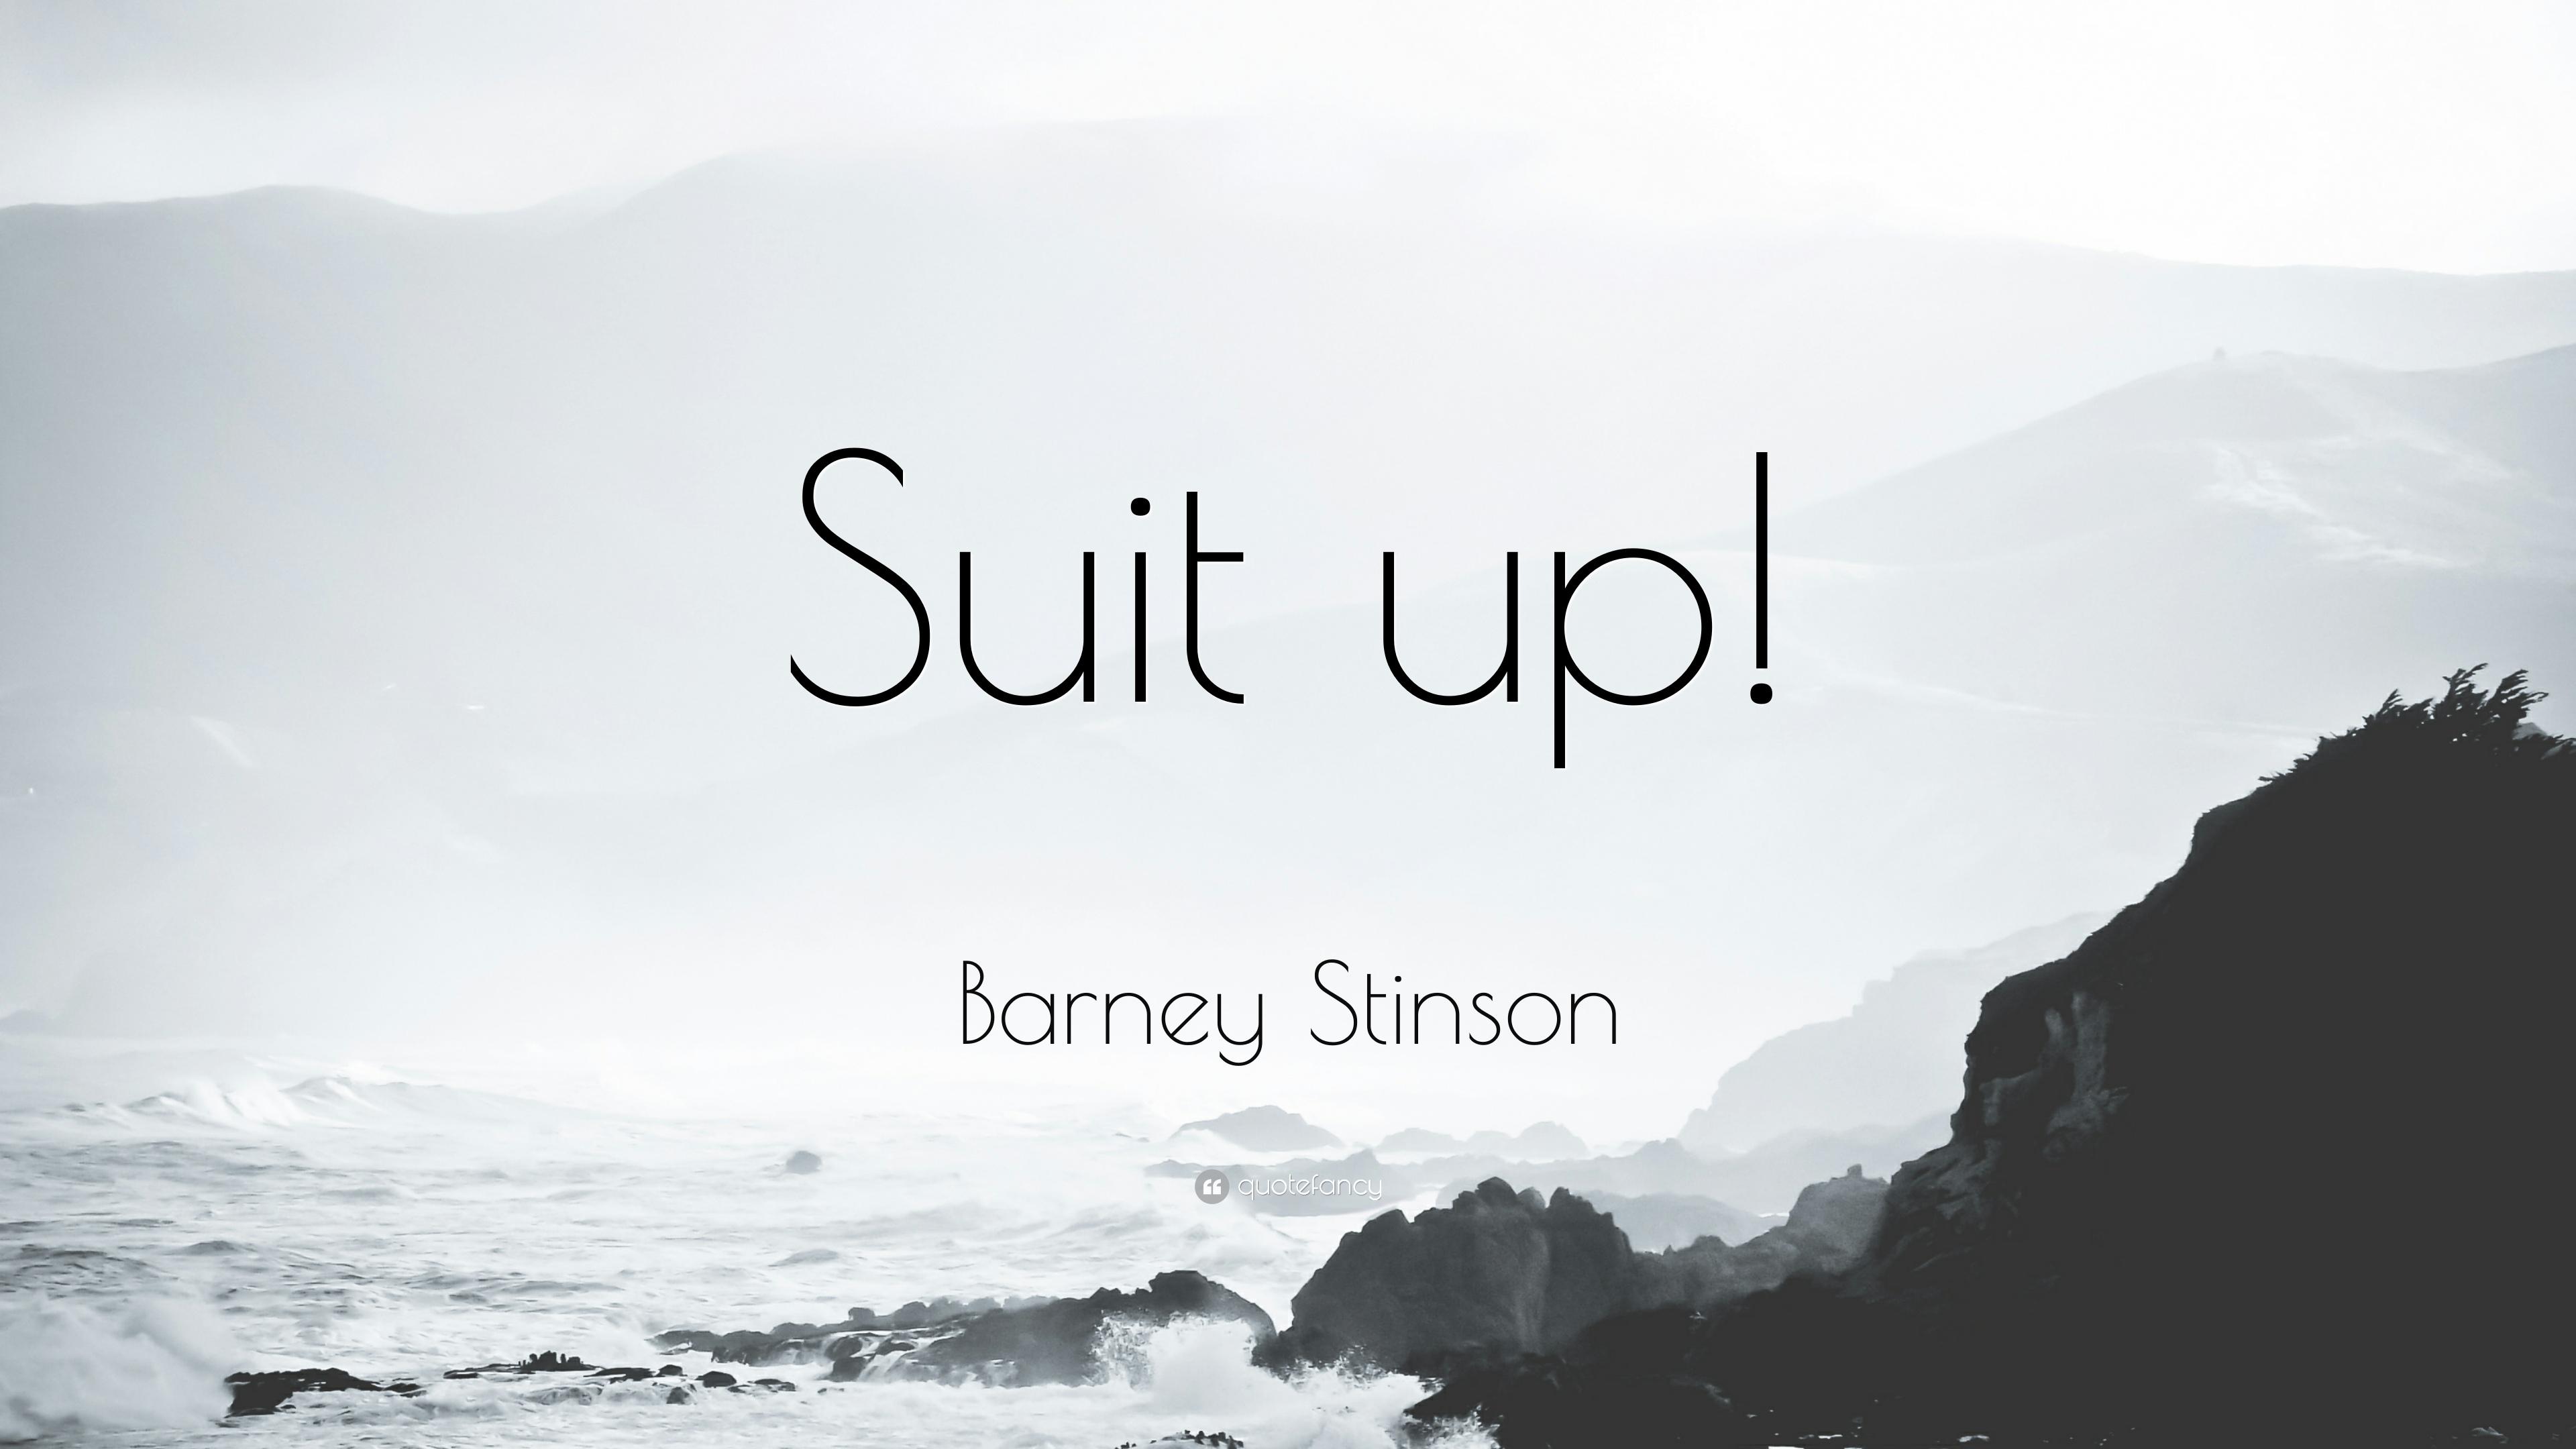 Barney Stinson Quote: “Suit up!” (12 wallpaper)